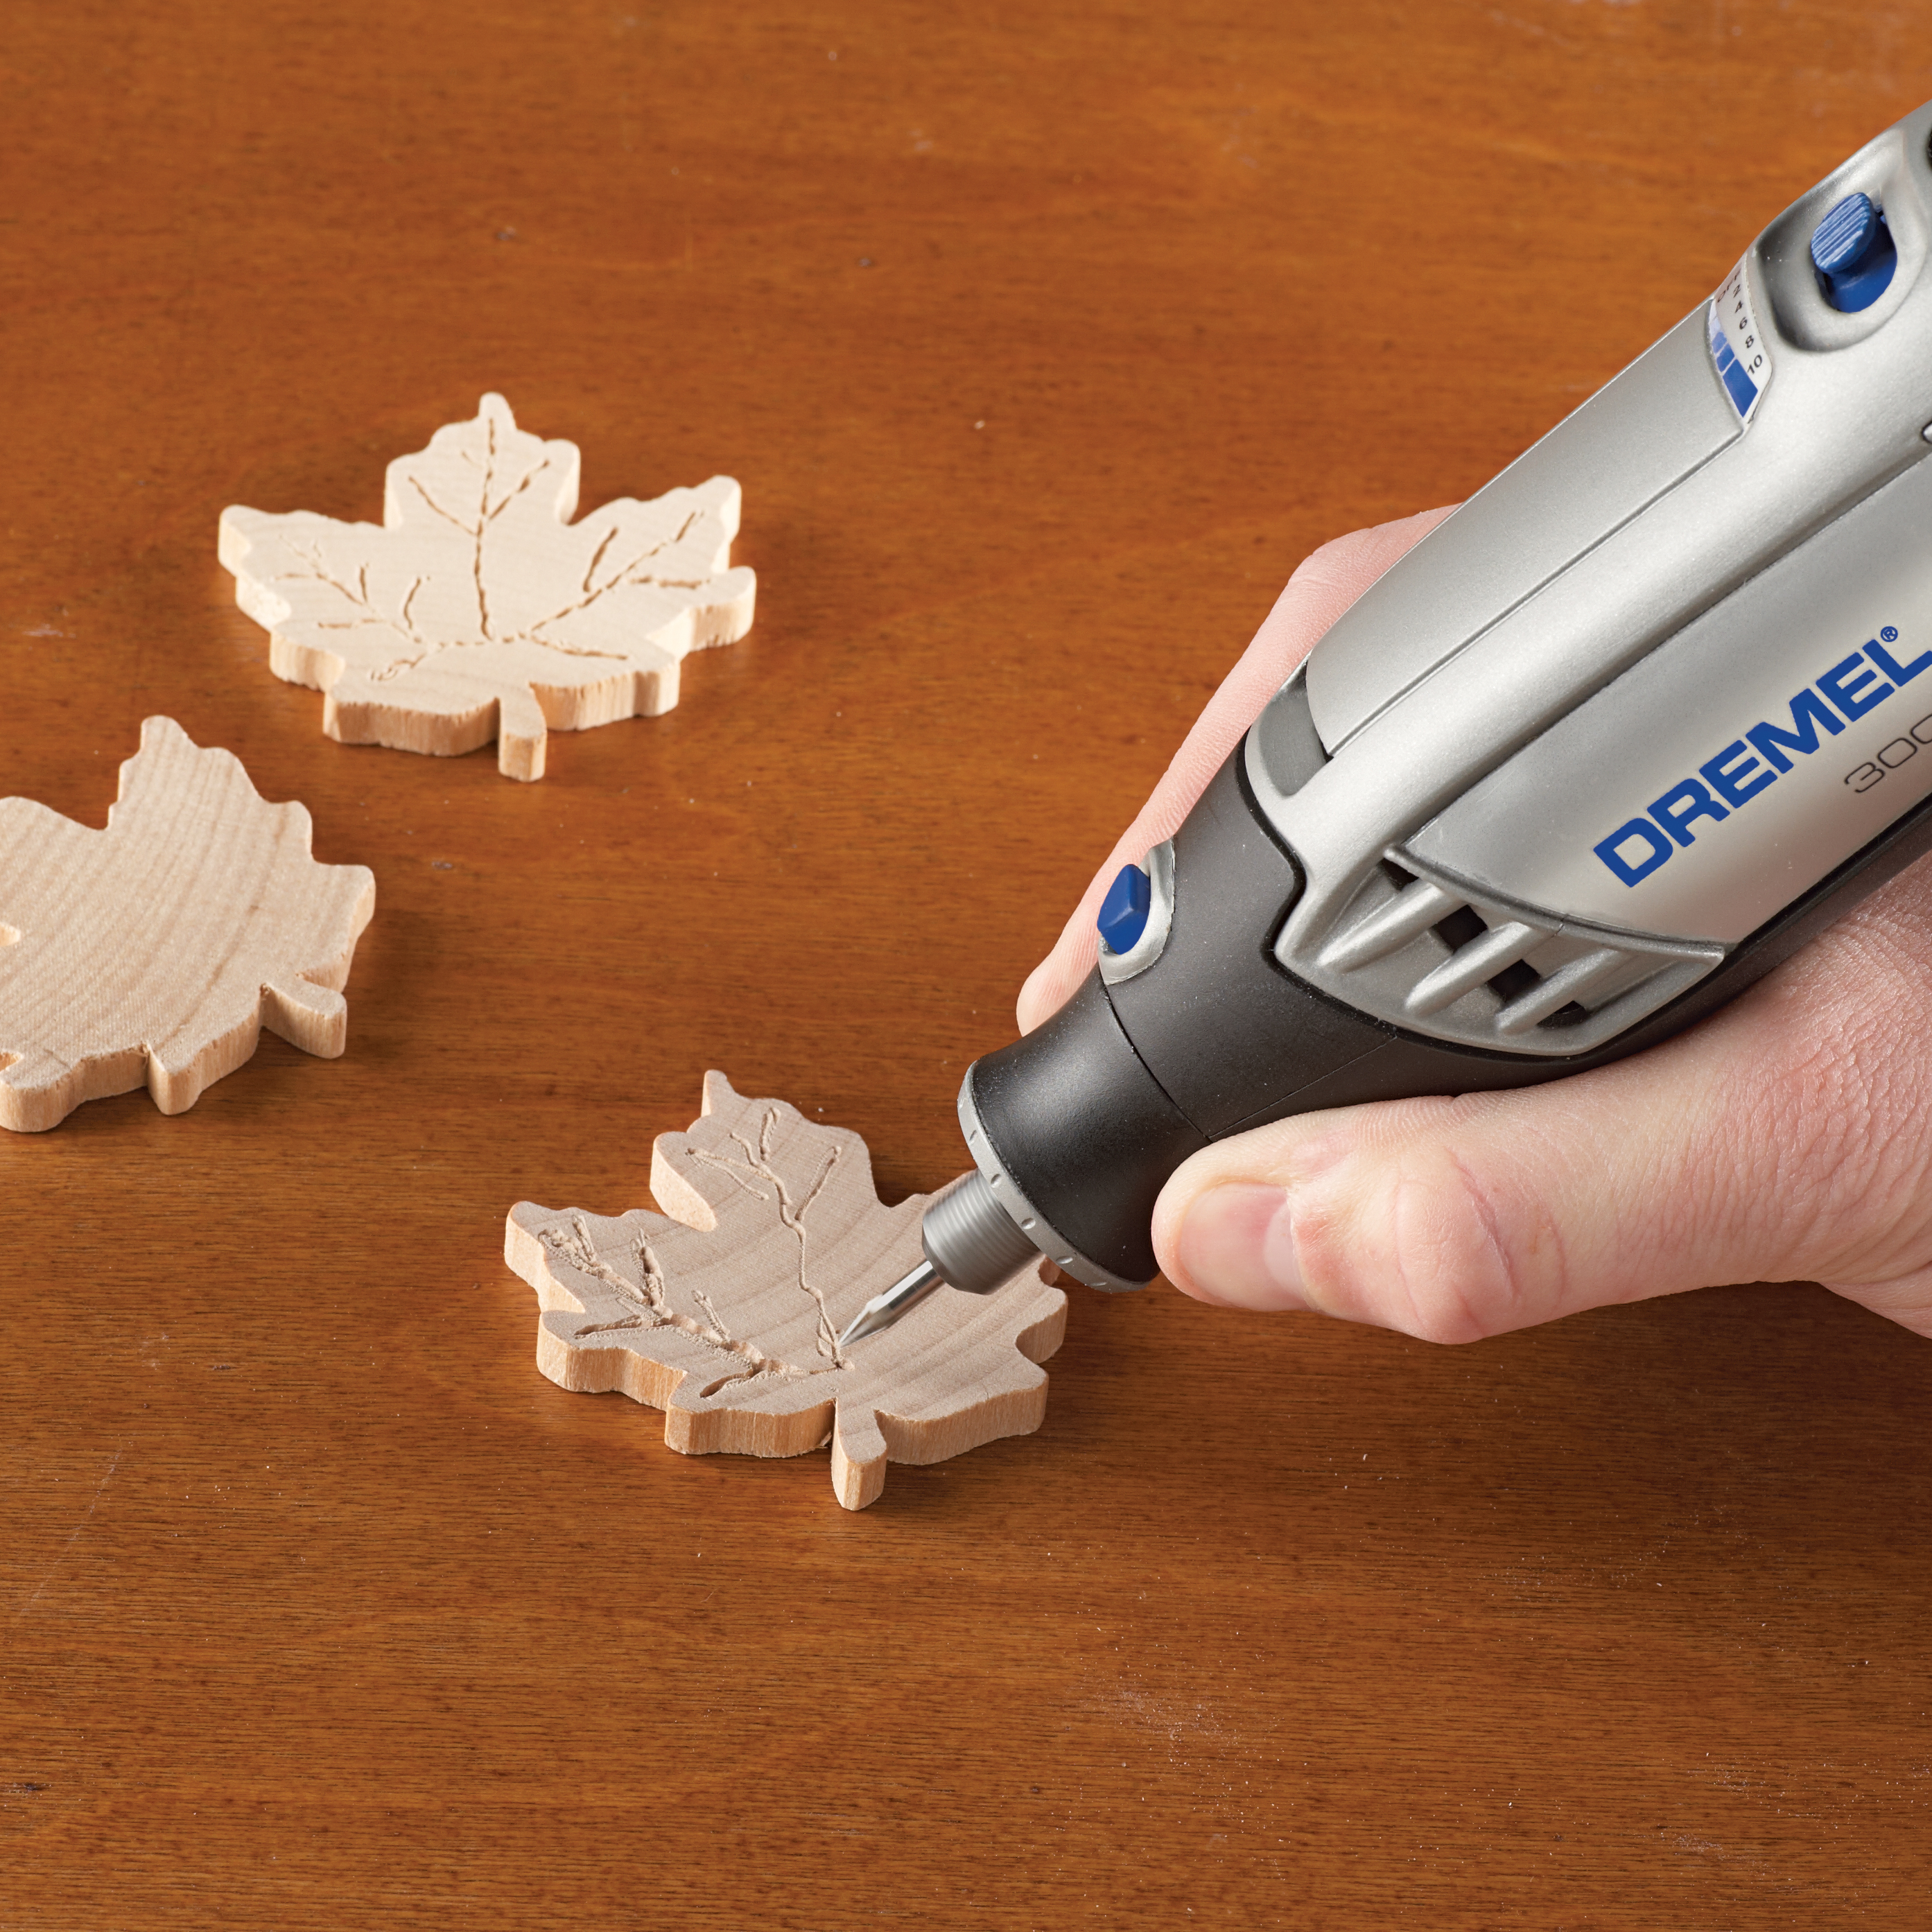 Dremel 3000-N/18 Variable Speed Rotary Tool with EZ Twist™ Nose Cap, 18 Accessories - image 5 of 27